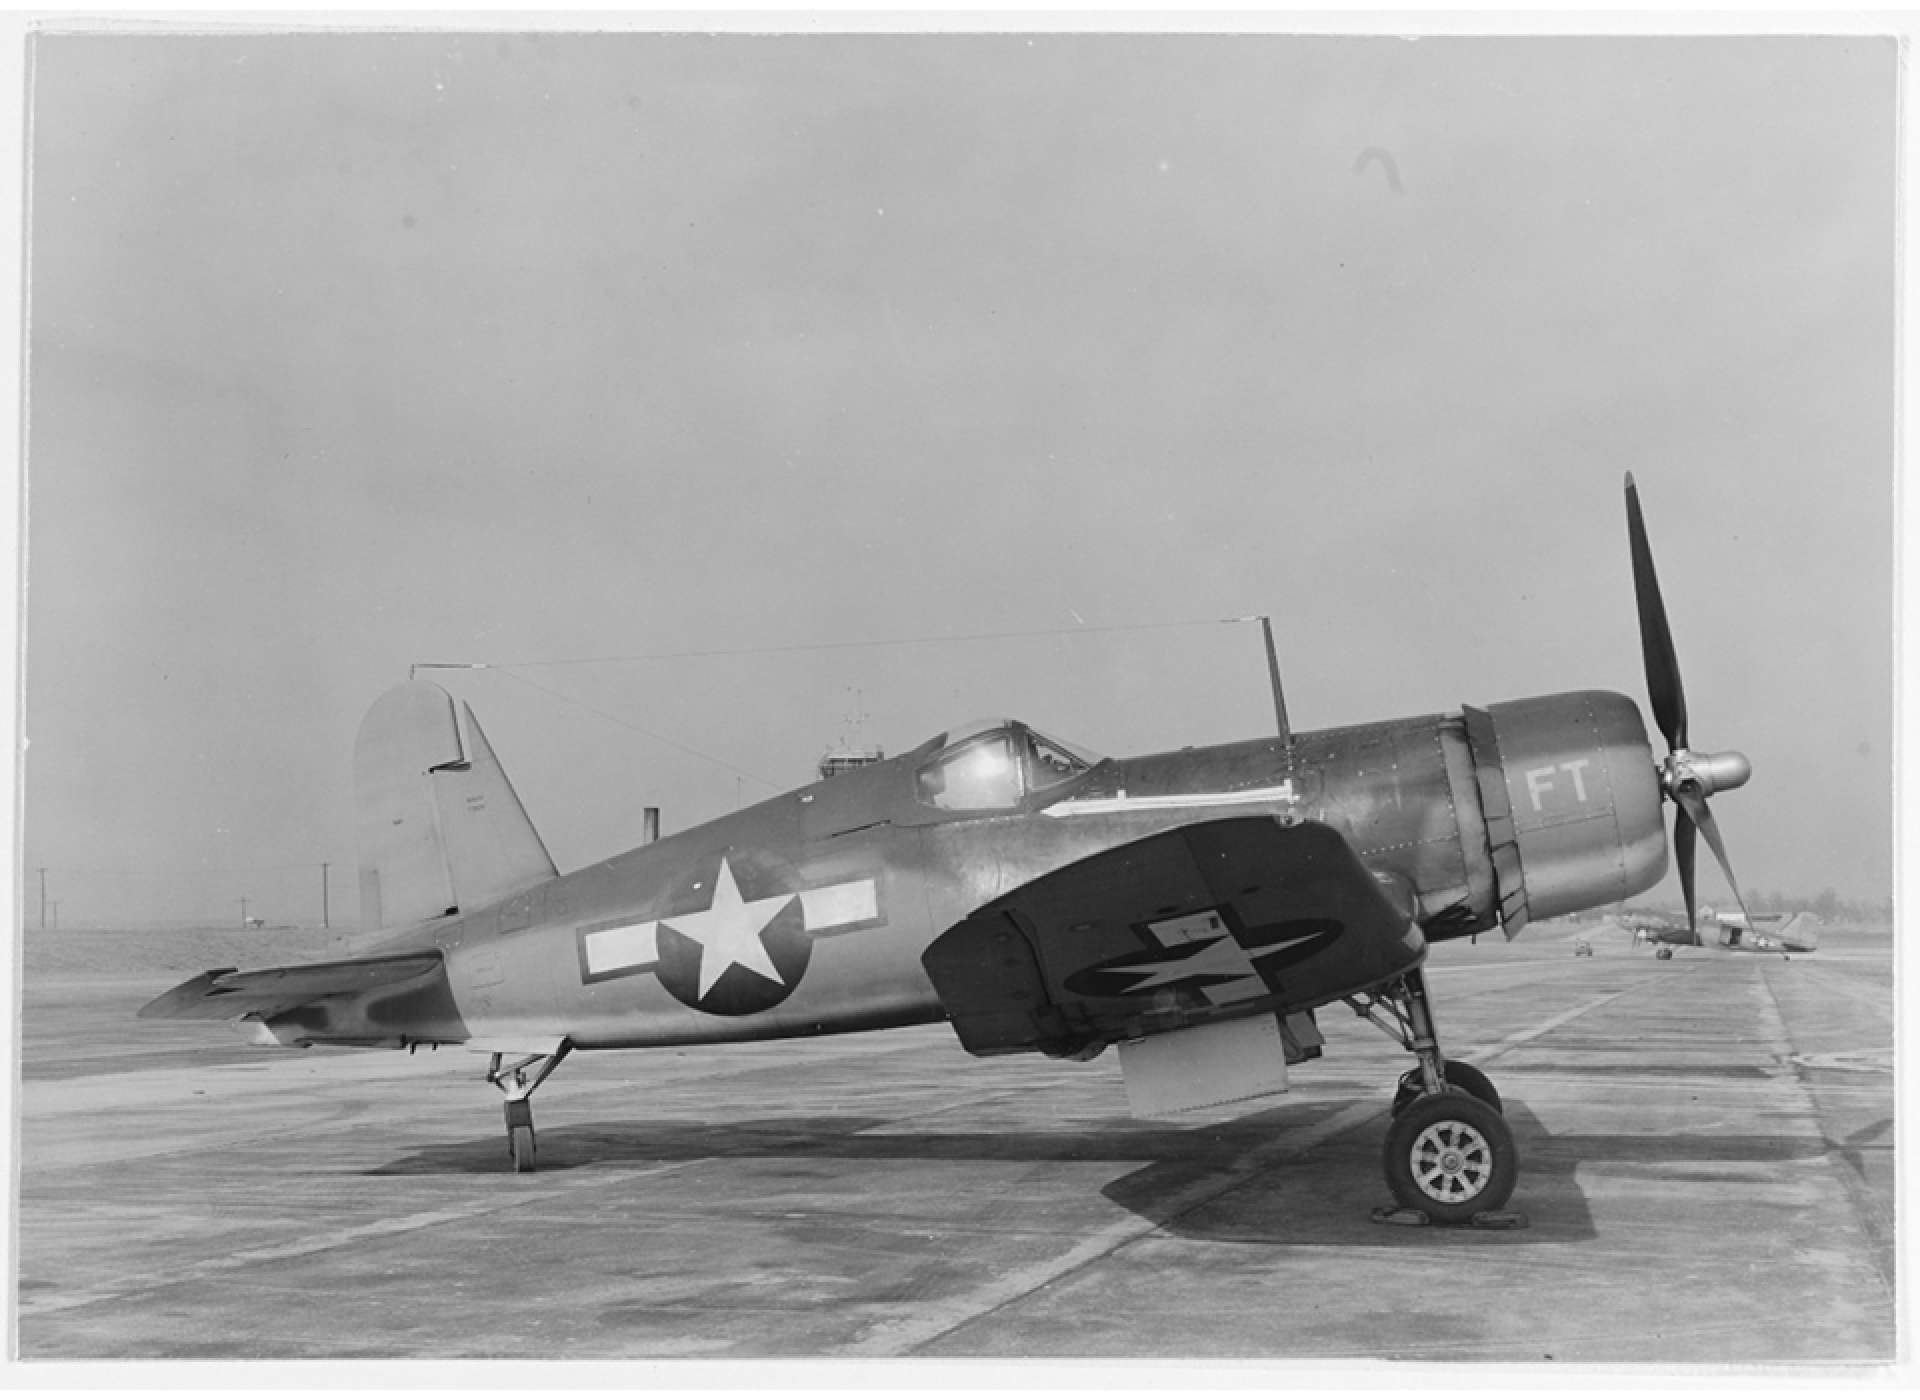 F4U-1 Corsair at Naval Air Station Patuxent River in Maryland. Courtesy Naval History and Heritage Command.